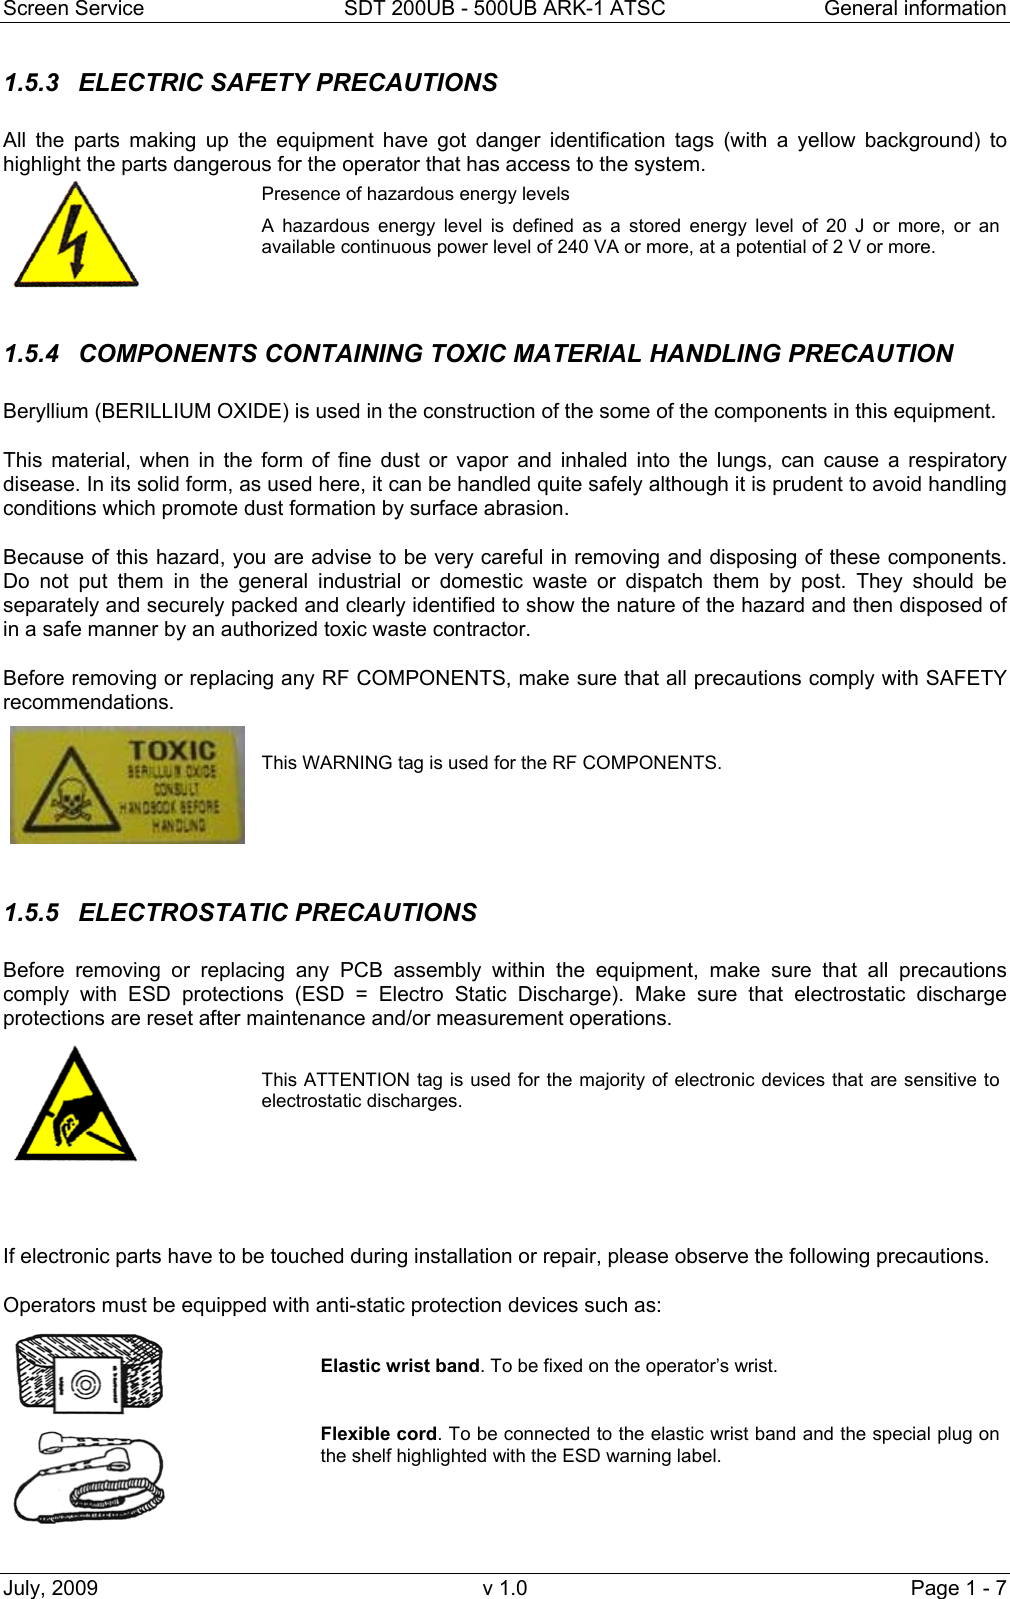 Screen Service  SDT 200UB - 500UB ARK-1 ATSC  General information July, 2009  v 1.0  Page 1 - 7 1.5.3 ELECTRIC SAFETY PRECAUTIONS All the parts making up the equipment have got danger identification tags (with a yellow background) to highlight the parts dangerous for the operator that has access to the system.  Presence of hazardous energy levels A hazardous energy level is defined as a stored energy level of 20 J or more, or an available continuous power level of 240 VA or more, at a potential of 2 V or more.  1.5.4  COMPONENTS CONTAINING TOXIC MATERIAL HANDLING PRECAUTION  Beryllium (BERILLIUM OXIDE) is used in the construction of the some of the components in this equipment. This material, when in the form of fine dust or vapor and inhaled into the lungs, can cause a respiratory disease. In its solid form, as used here, it can be handled quite safely although it is prudent to avoid handling conditions which promote dust formation by surface abrasion. Because of this hazard, you are advise to be very careful in removing and disposing of these components. Do not put them in the general industrial or domestic waste or dispatch them by post. They should be separately and securely packed and clearly identified to show the nature of the hazard and then disposed of in a safe manner by an authorized toxic waste contractor. Before removing or replacing any RF COMPONENTS, make sure that all precautions comply with SAFETY recommendations.    This WARNING tag is used for the RF COMPONENTS.  1.5.5 ELECTROSTATIC PRECAUTIONS Before removing or replacing any PCB assembly within the equipment, make sure that all precautions comply with ESD protections (ESD = Electro Static Discharge). Make sure that electrostatic discharge protections are reset after maintenance and/or measurement operations.   This ATTENTION tag is used for the majority of electronic devices that are sensitive to electrostatic discharges.   If electronic parts have to be touched during installation or repair, please observe the following precautions. Operators must be equipped with anti-static protection devices such as:   Elastic wrist band. To be fixed on the operator’s wrist.  Flexible cord. To be connected to the elastic wrist band and the special plug on the shelf highlighted with the ESD warning label.  